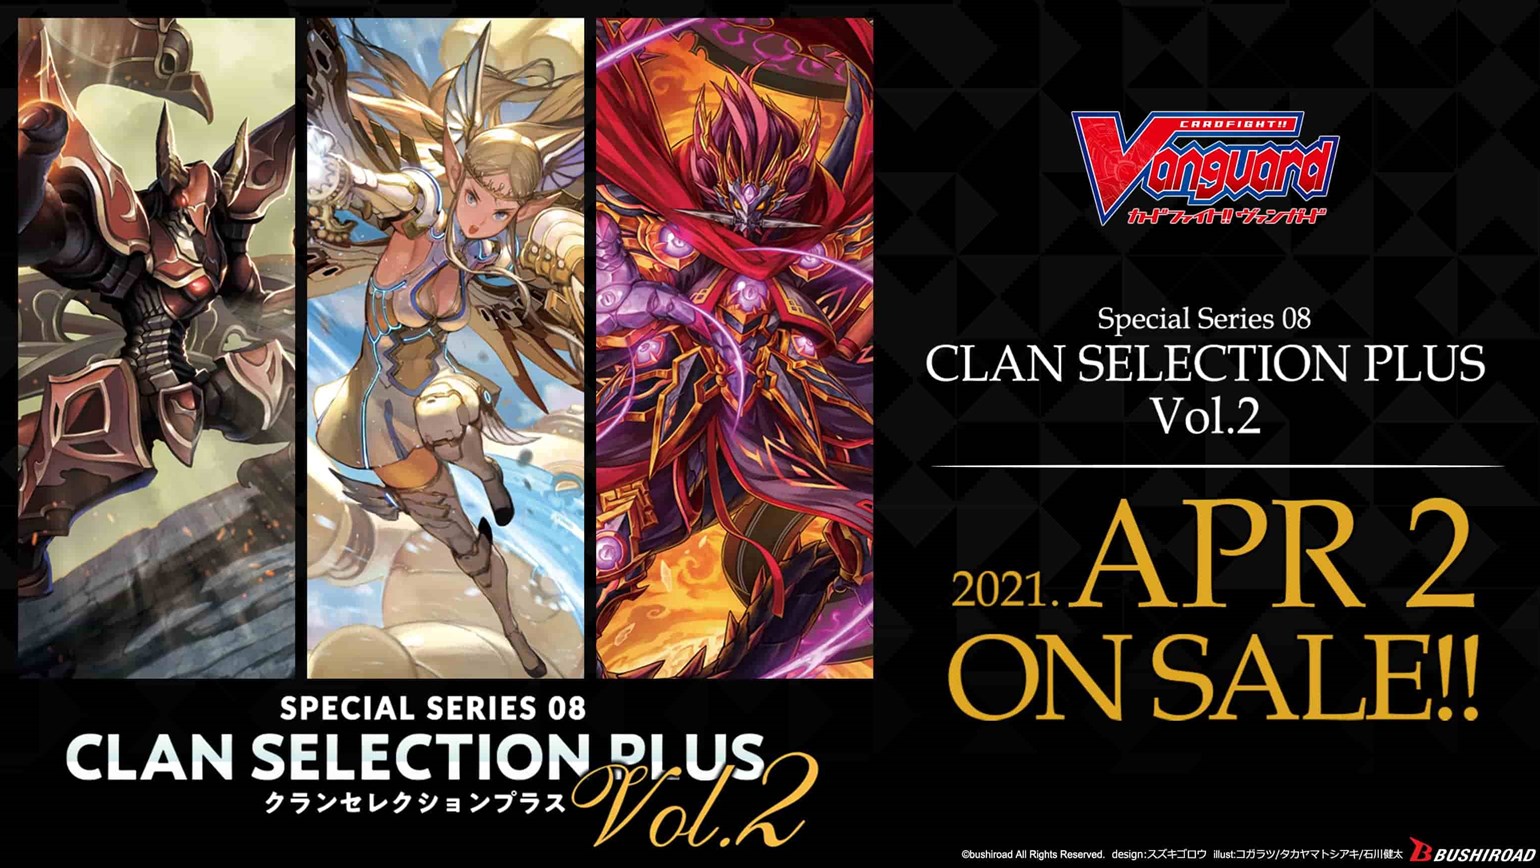 New English Edition Special Series 08 Clan Selection Plus Vol.2 is Coming to Stores on April 2nd!